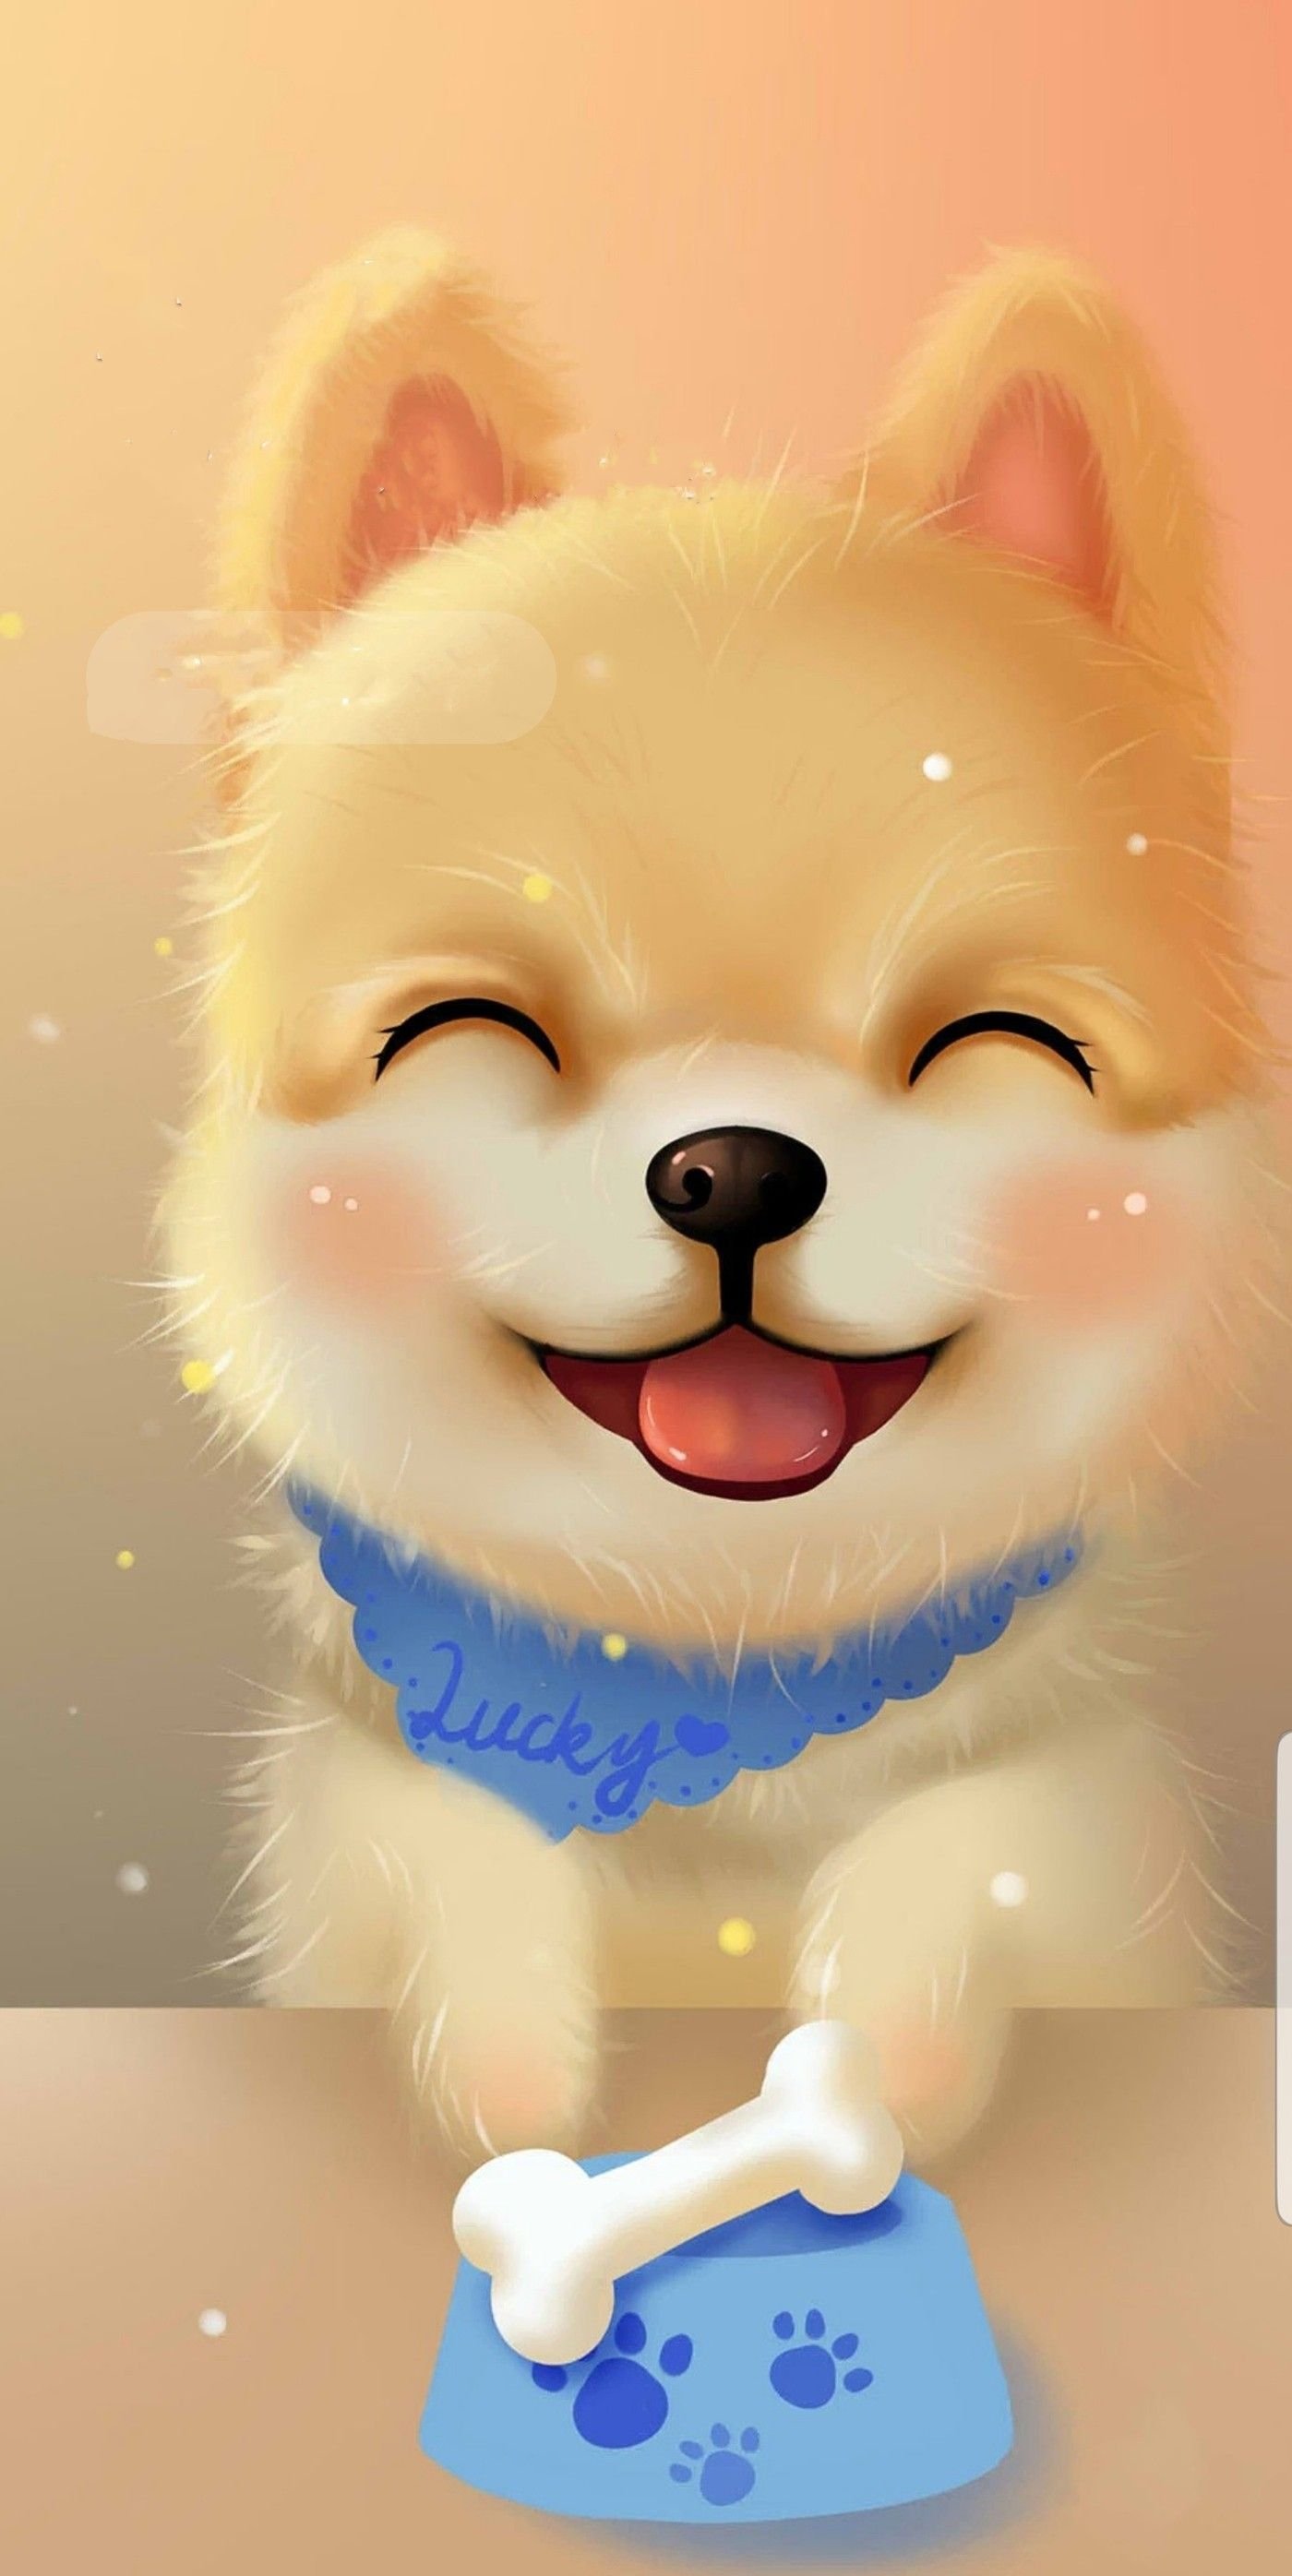 Wallpaper girl smile dog pet cute anime hd picture image